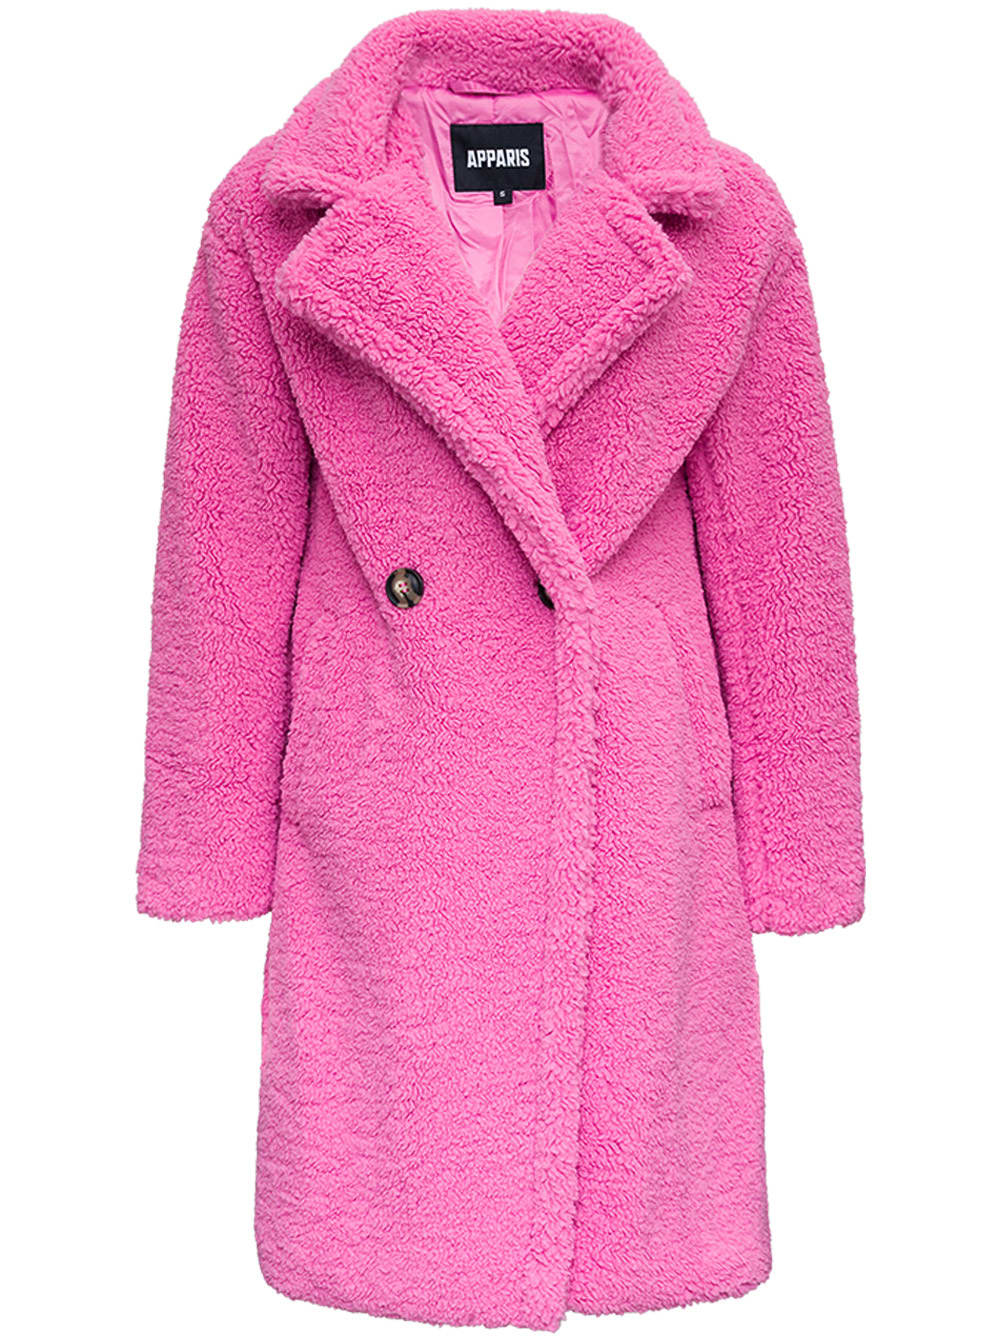 Apparis Double Breasted Anouck Pink Teddy Coat